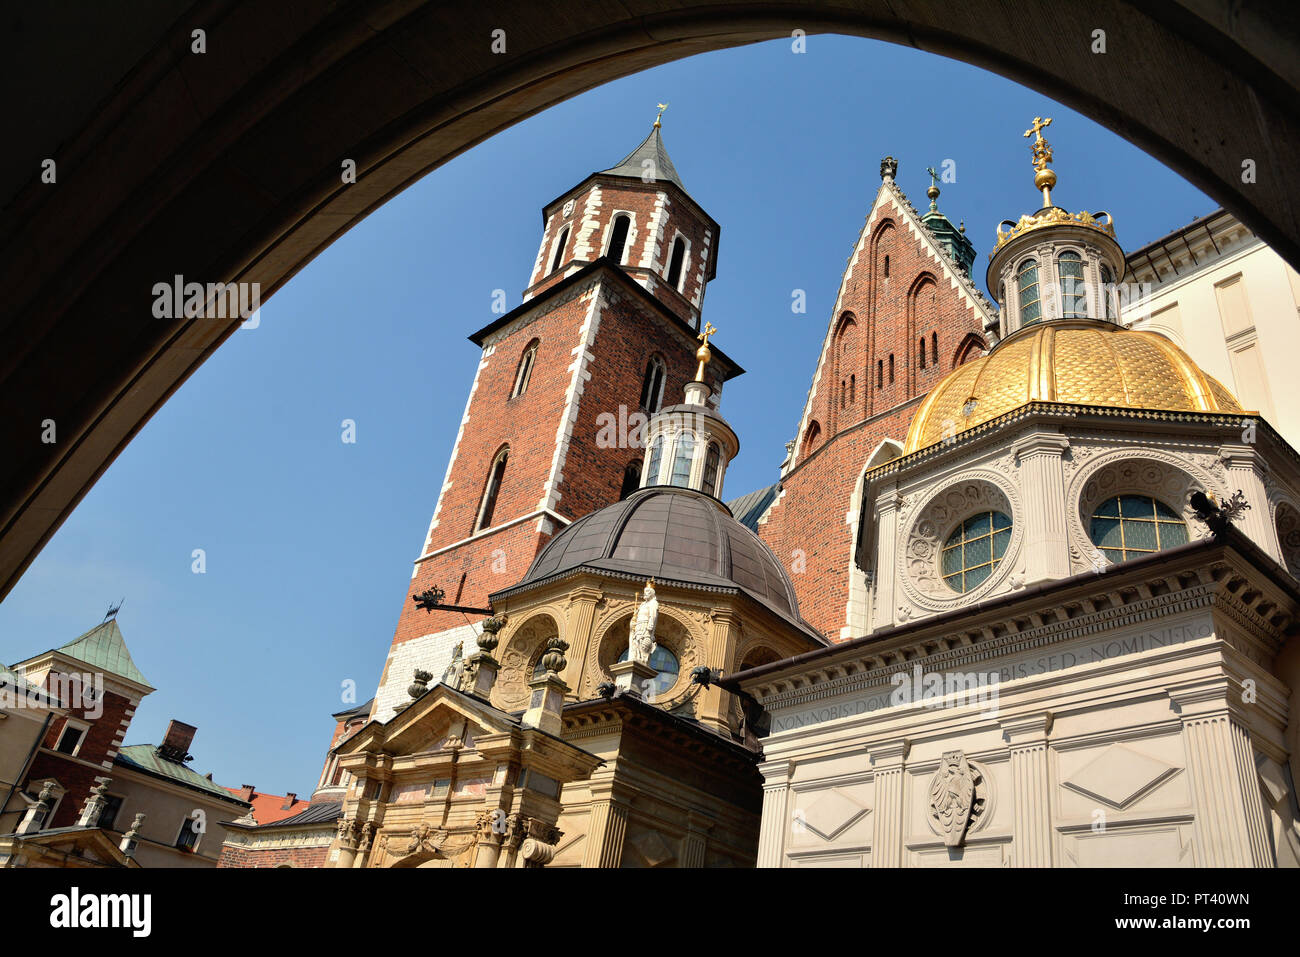 The Royal Archcathedral Basilica of Saints Stanislaus and Wenceslaus on the Wawel Hill. Architecture close up, part of Wawel Castle in Krakow, Poland. Stock Photo